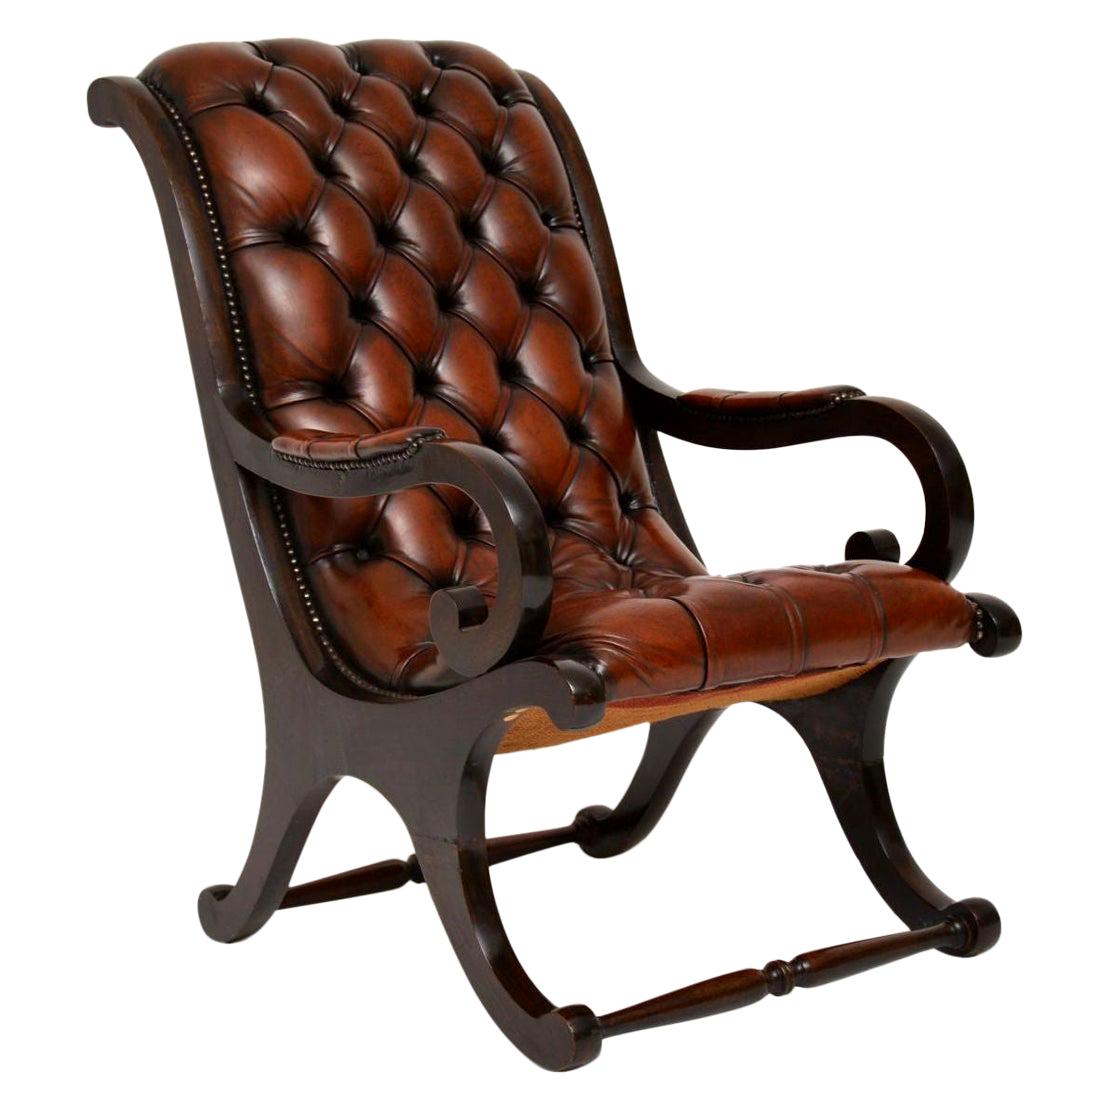 Antique Regency Style Leather and Mahogany Armchair